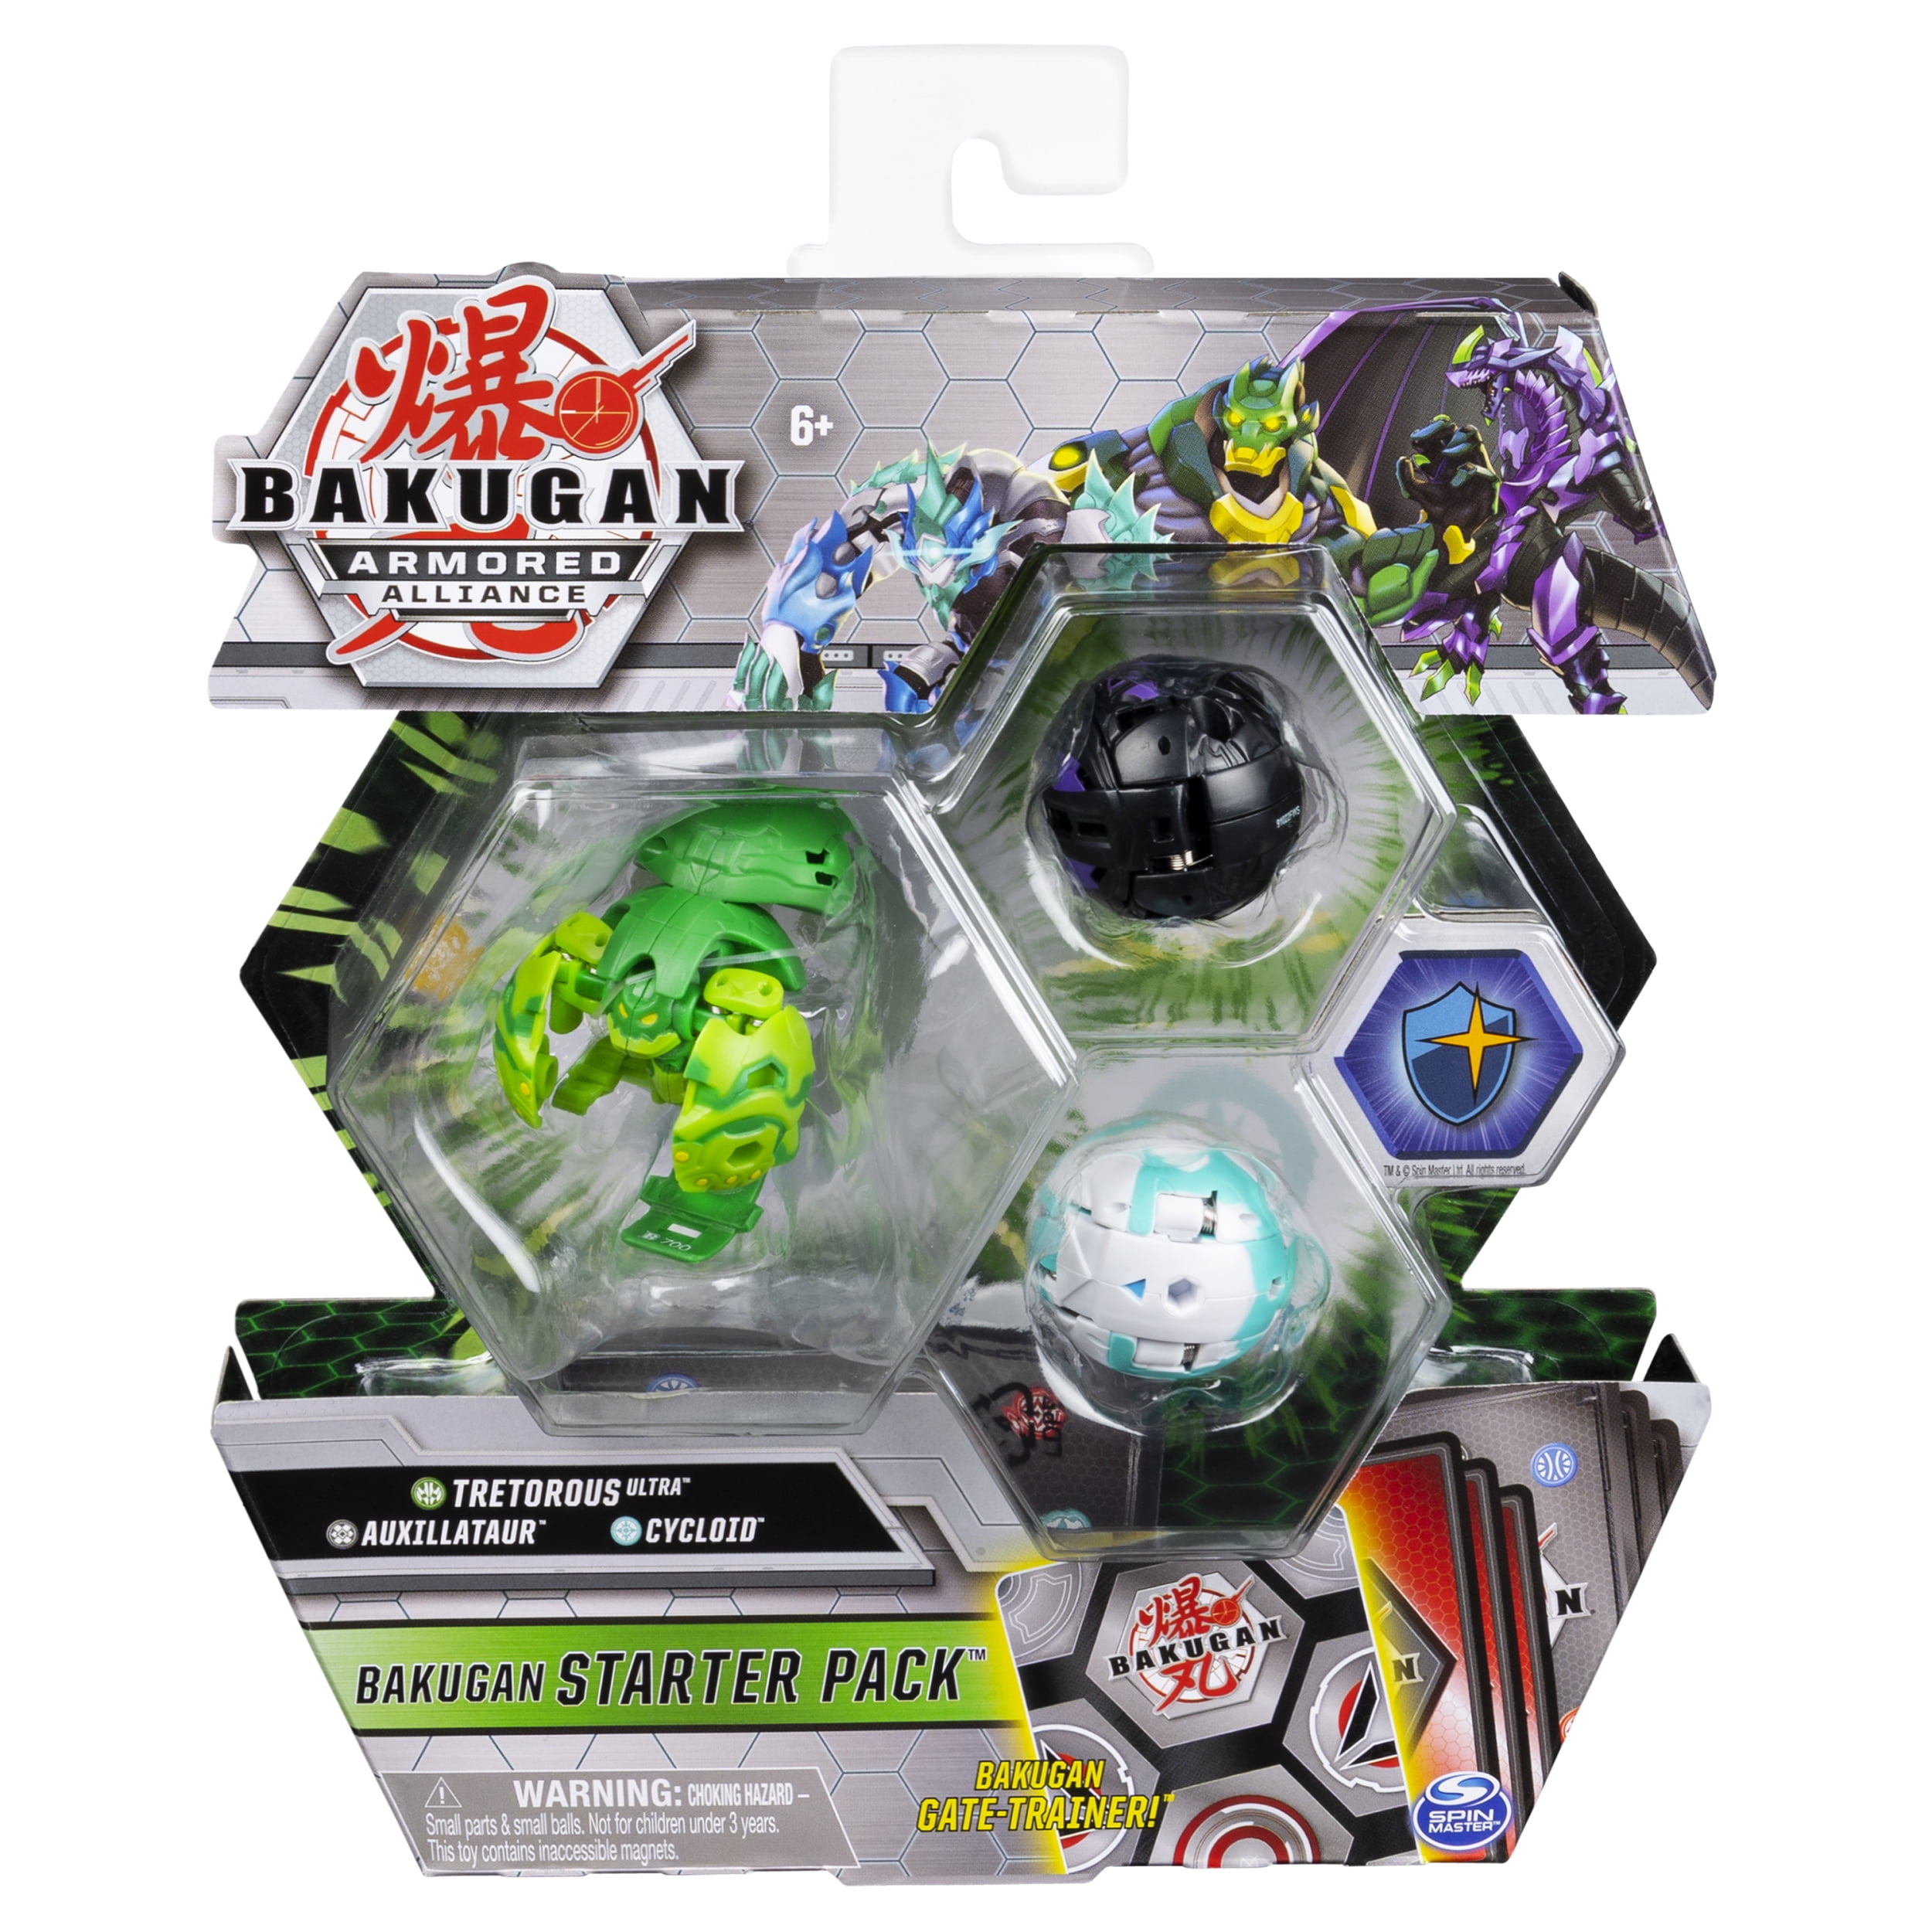 Bakugan Armored Alliance Starter 3-Pack *CHOOSE YOUR FAVOURITE* 